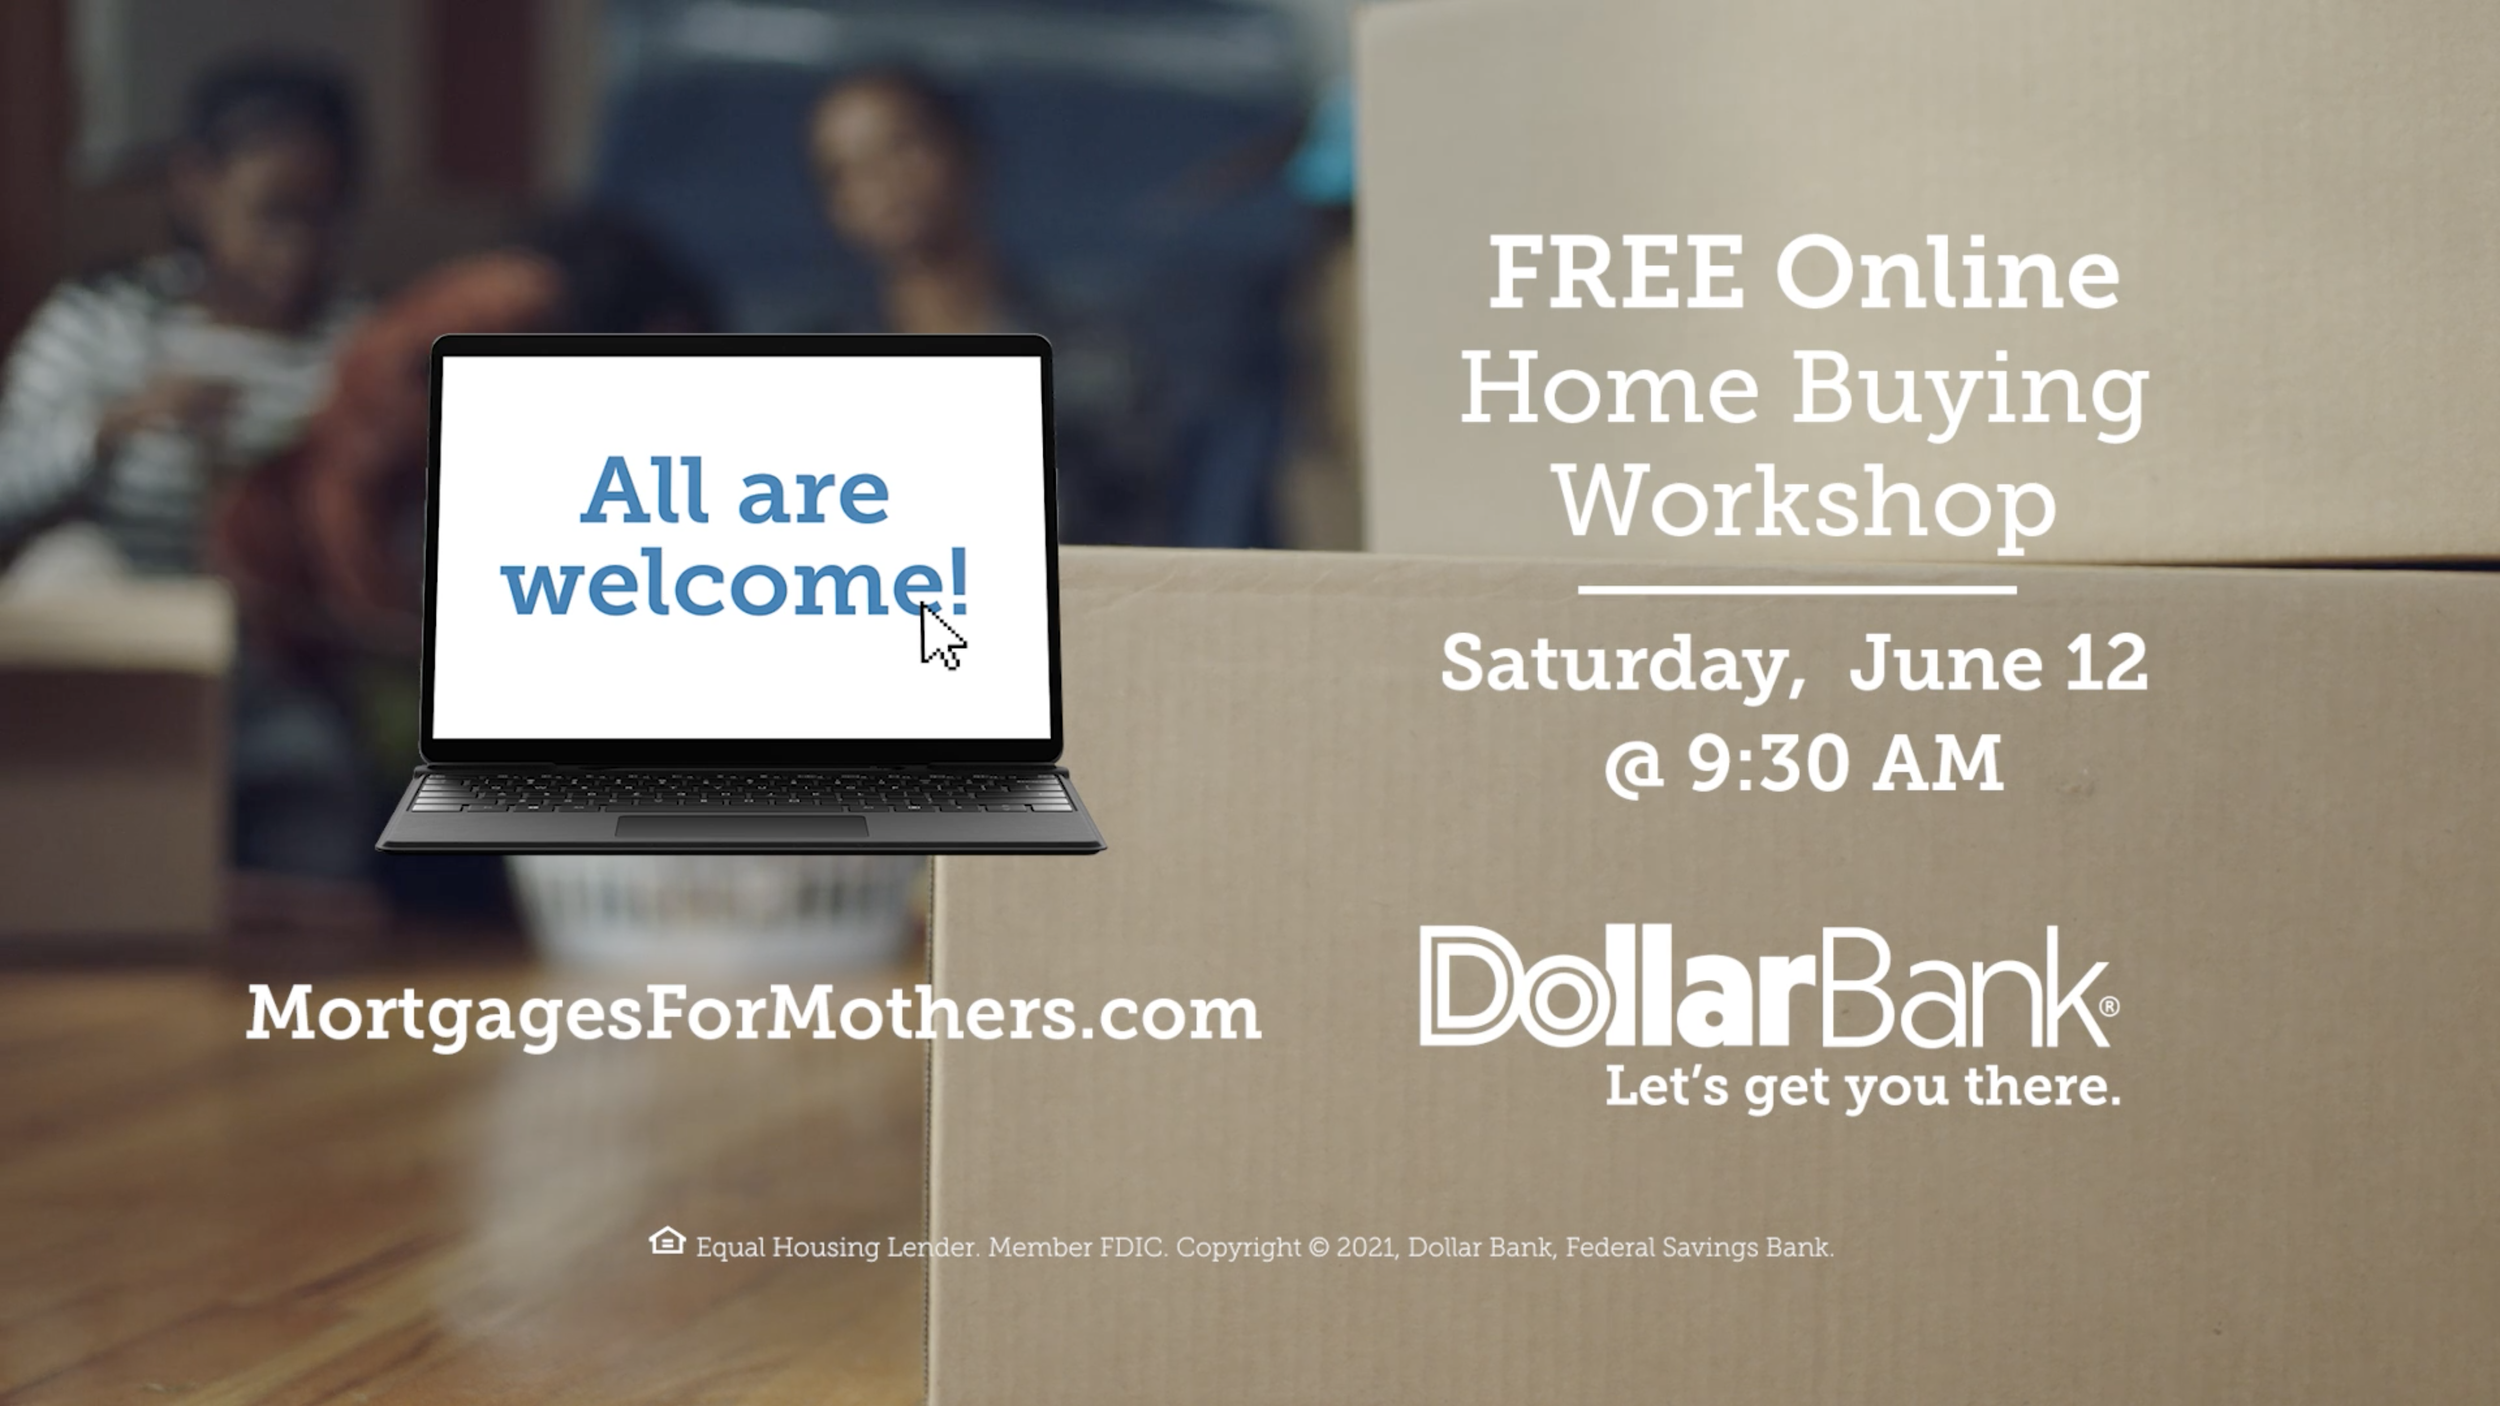 Dollar Bank: Mortgages for Mothers